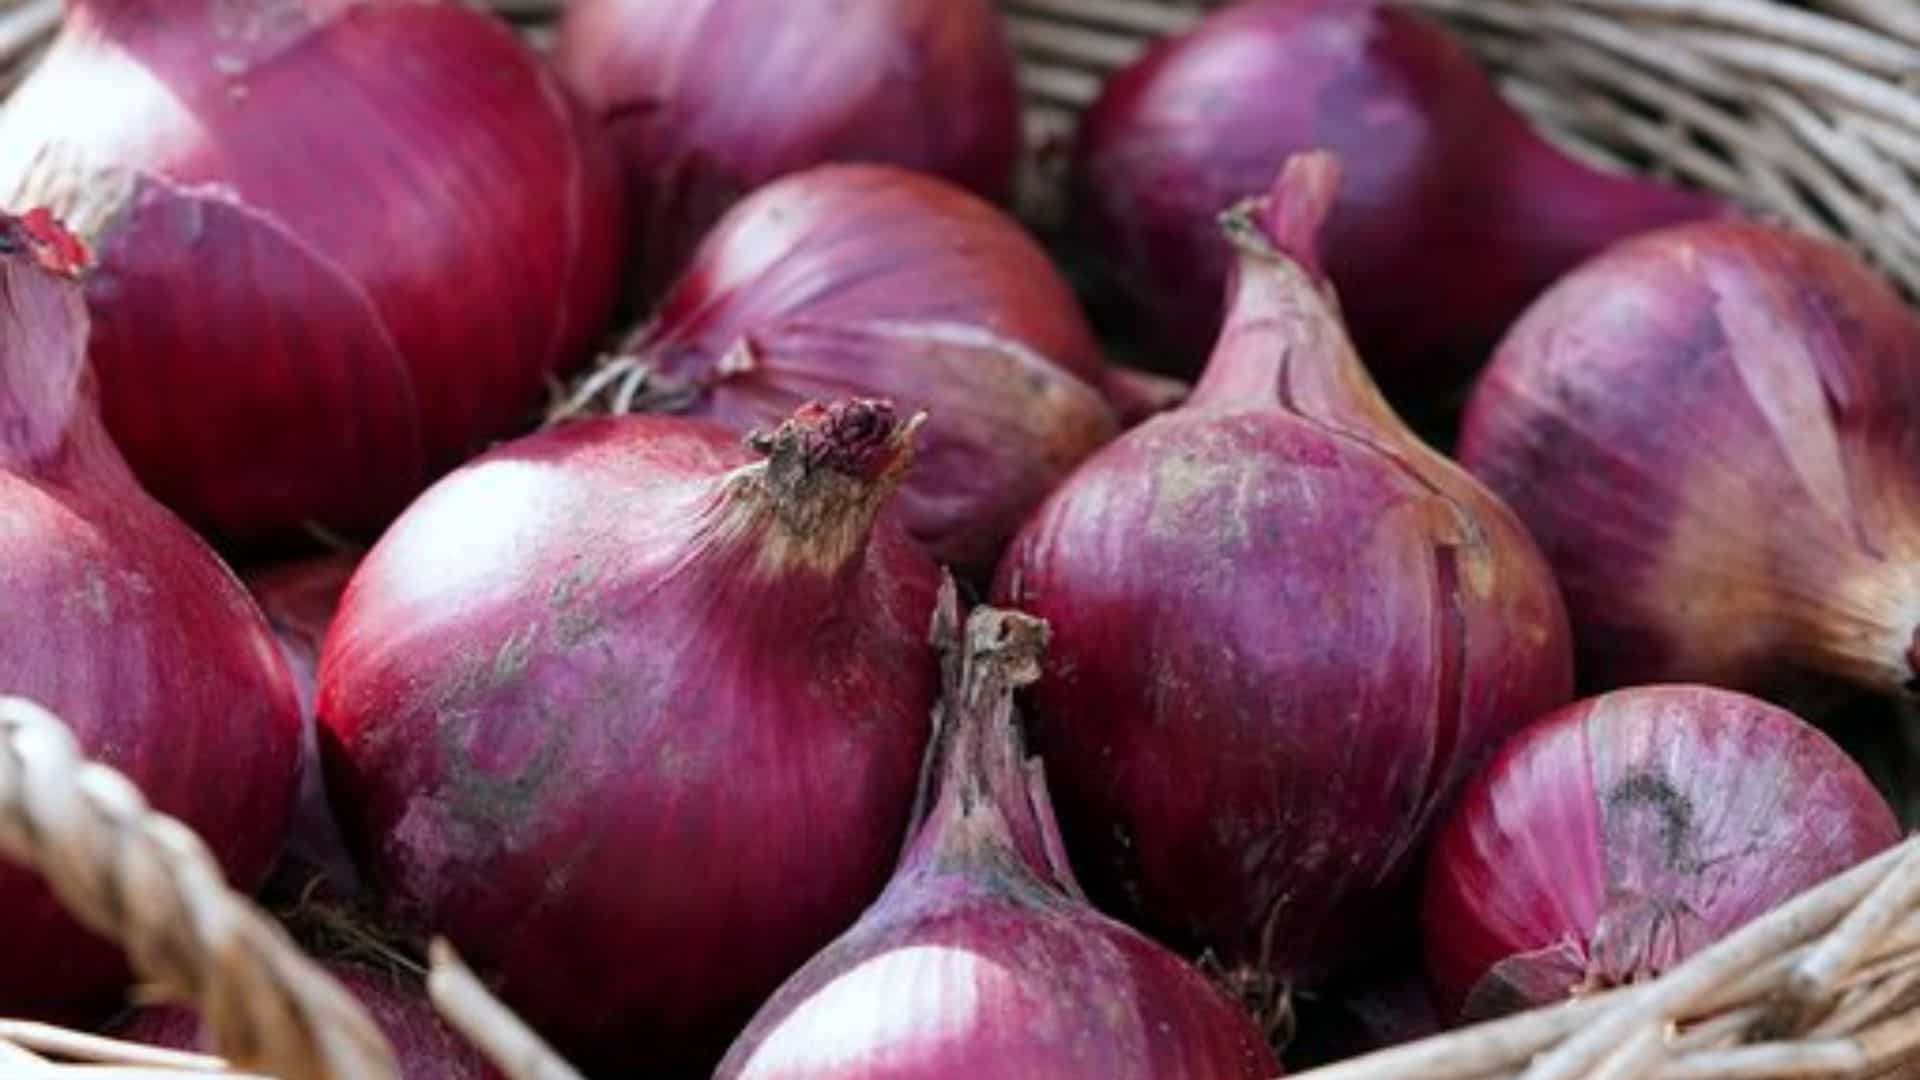 Indian govt imposes 40% export duty on onions to curb hovering local prices